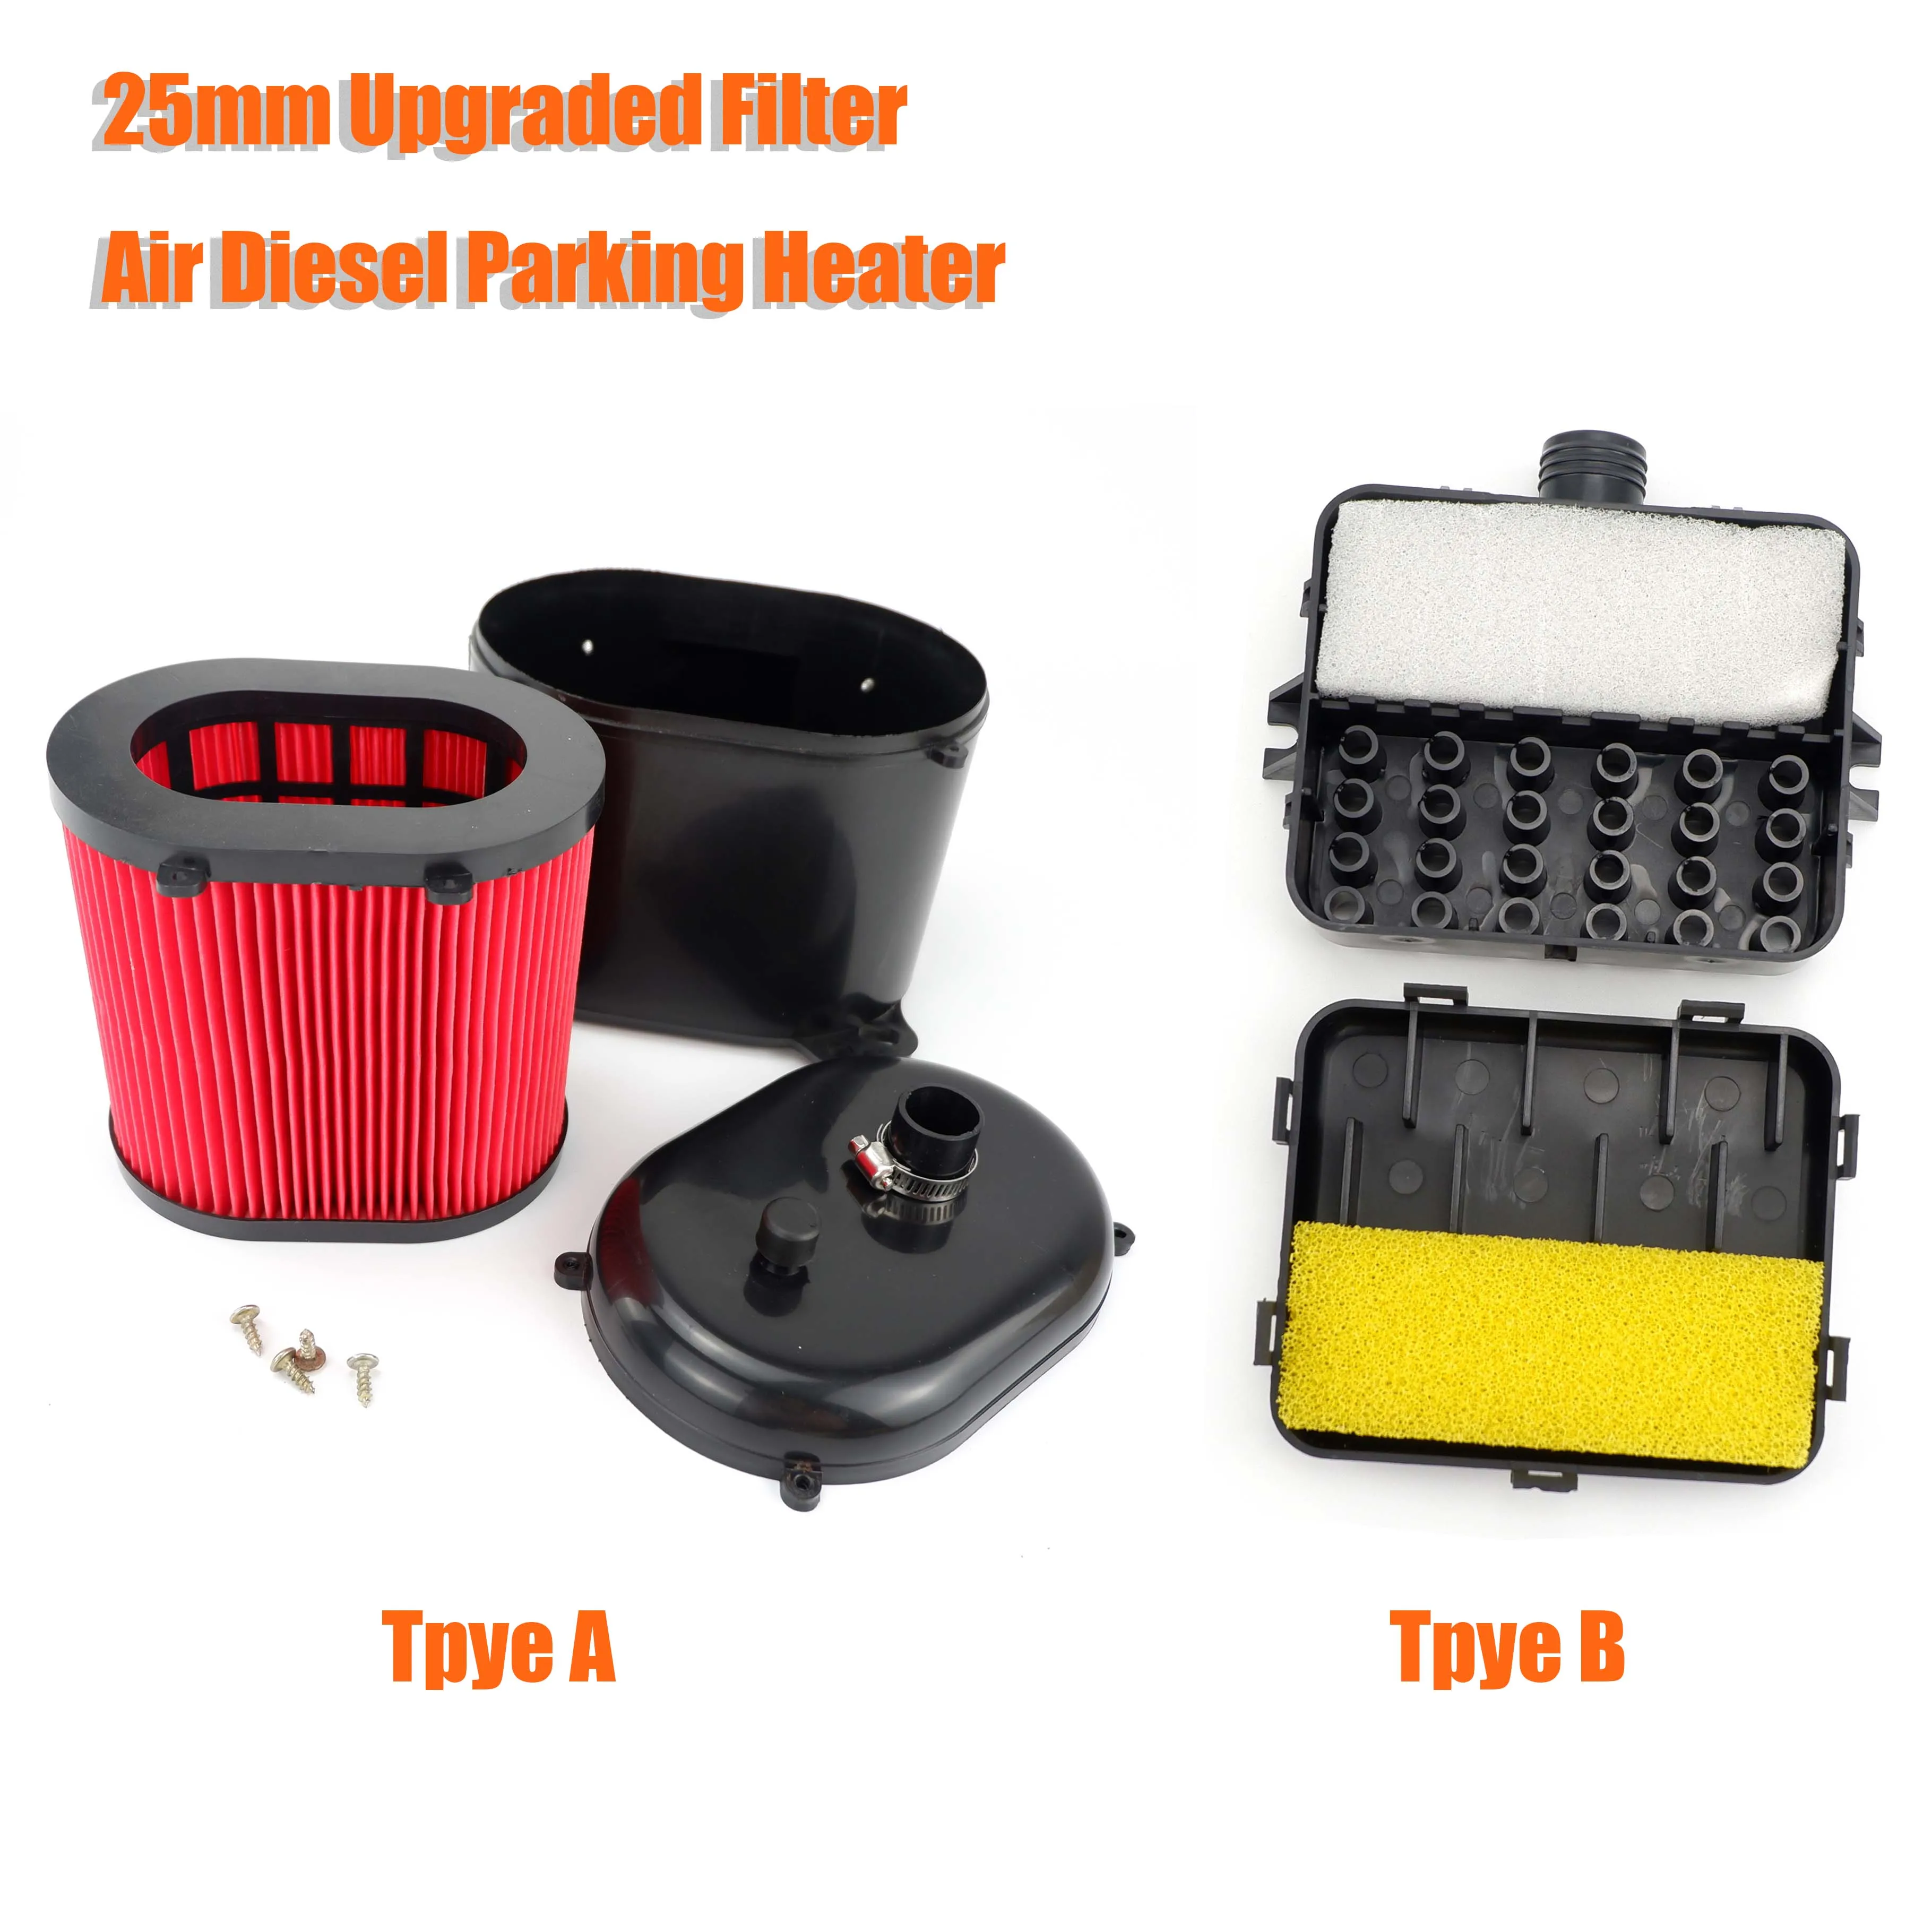 

25mm Upgraded Air Filter Silencer Air Diesel Parking Heater Intake Replacement For Webasto Eberspacher Black & Red